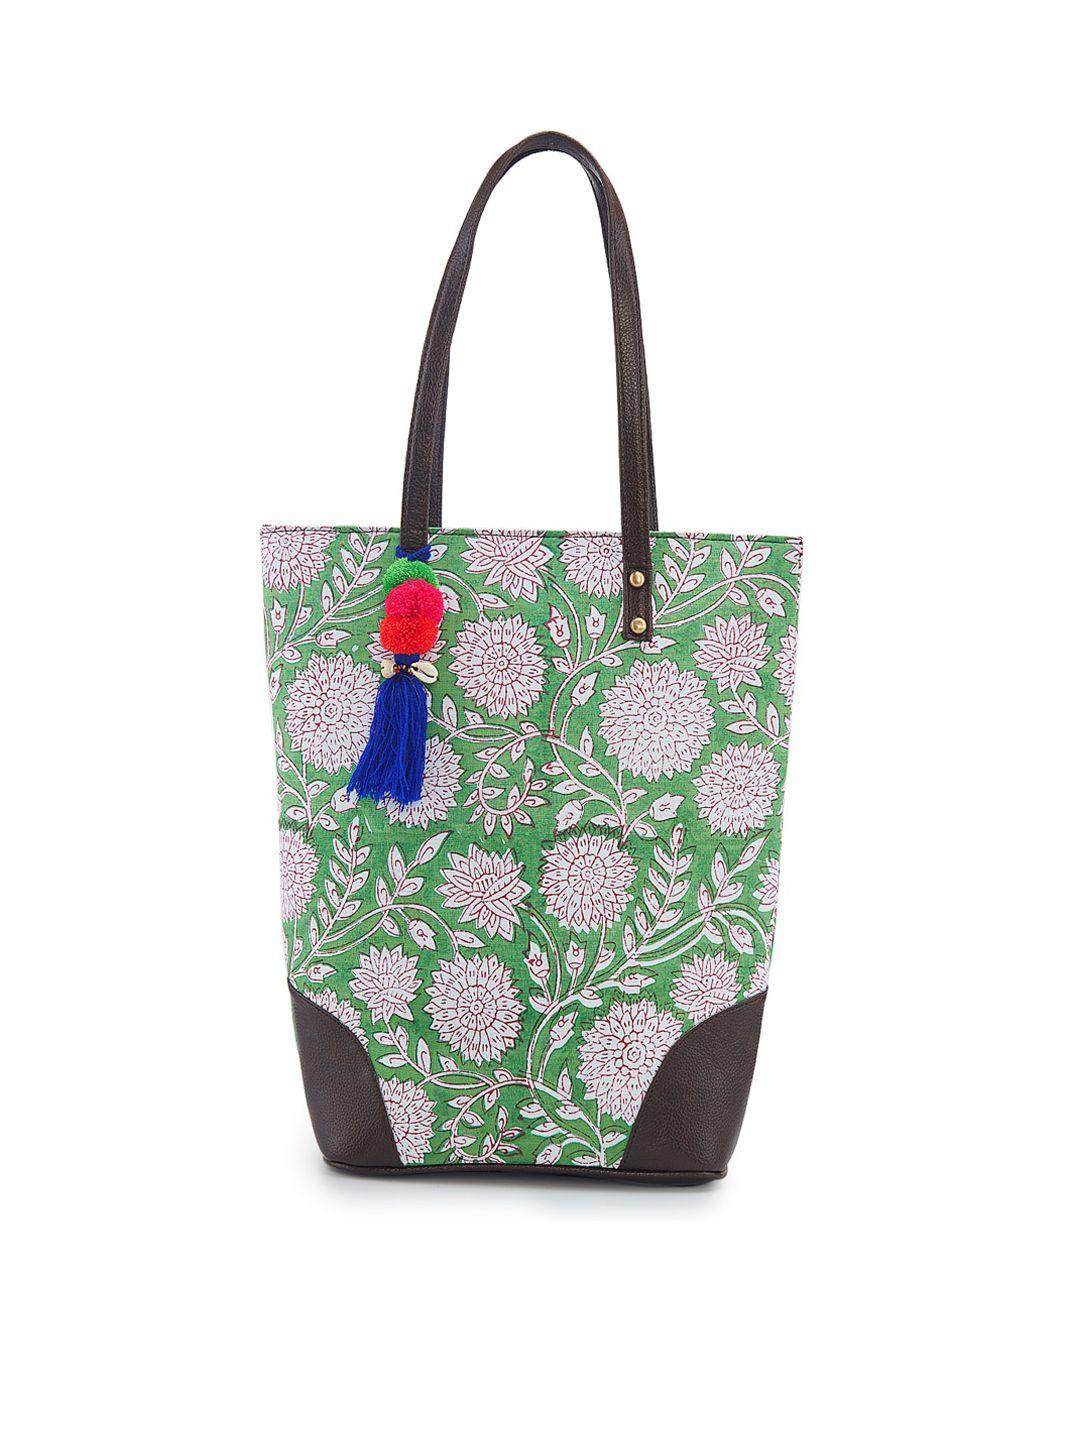 nepri floral printed oversized shopper tote bag with tasselled